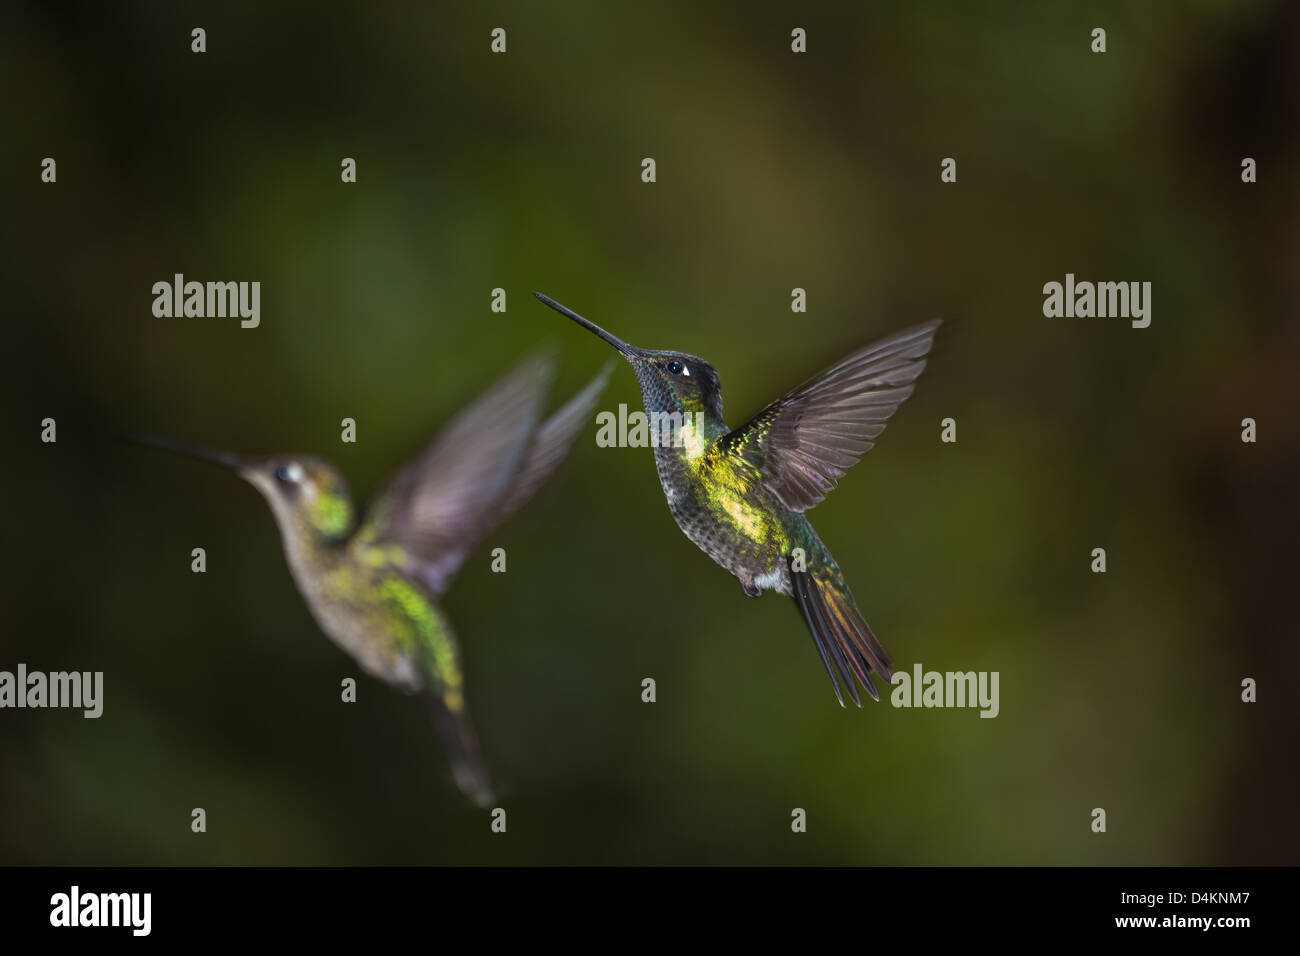 Two hummingbirds in the cloudforest near Los Quetzales lodge, La Amistad national park, Chiriqui province, Republic of Panama, Central America. Stock Photo